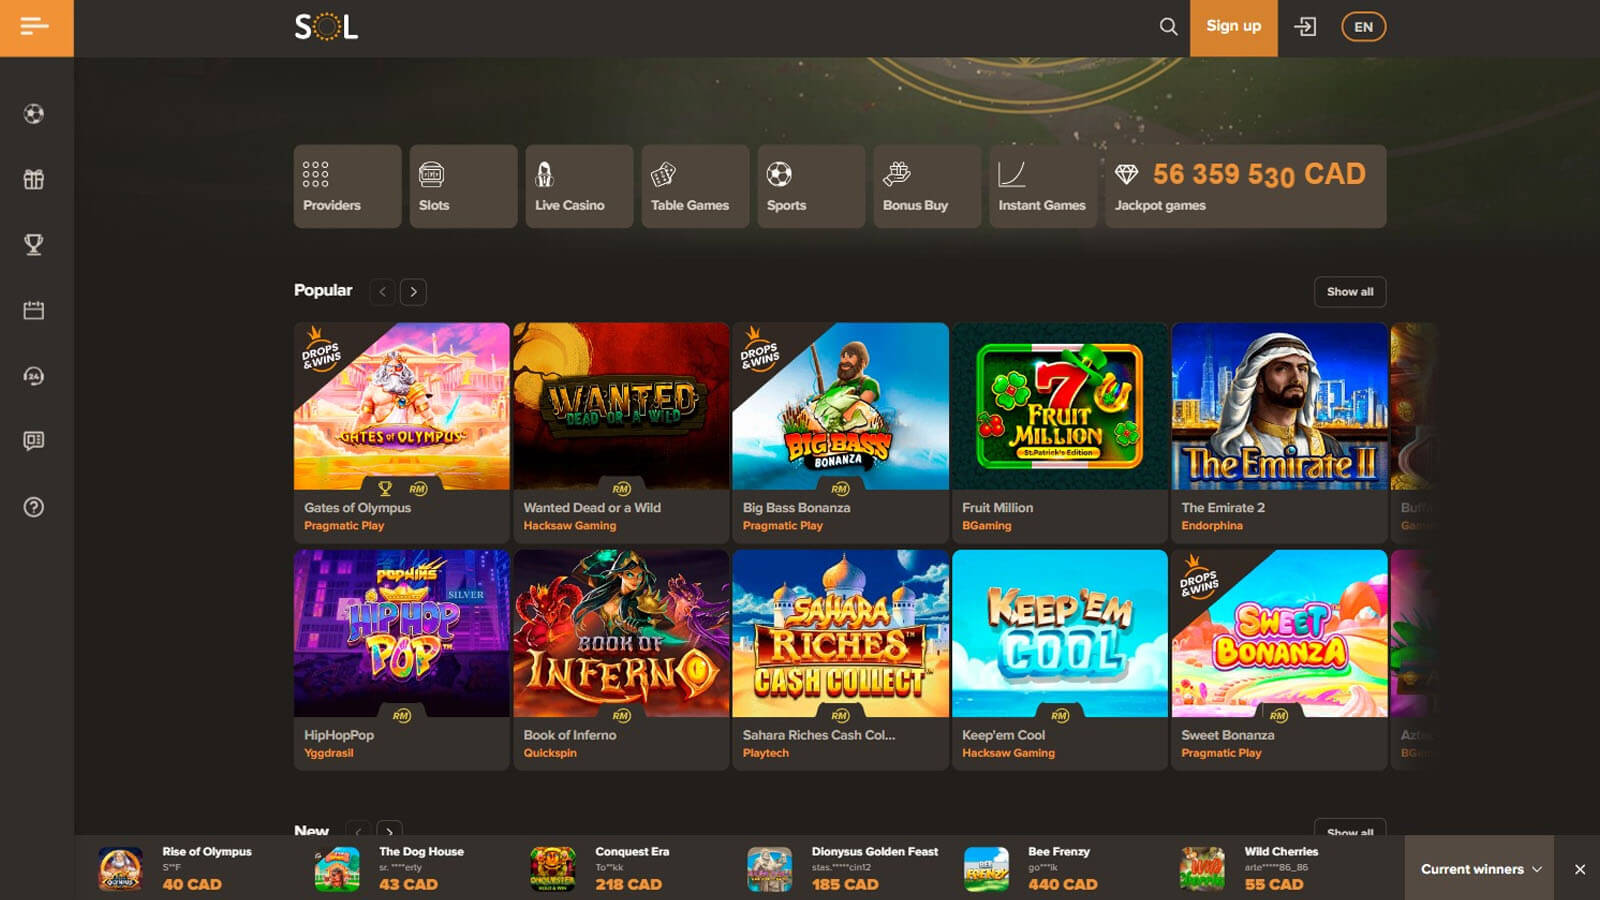 Sol Casino #3. Best casino online Canada site for Playtech live games